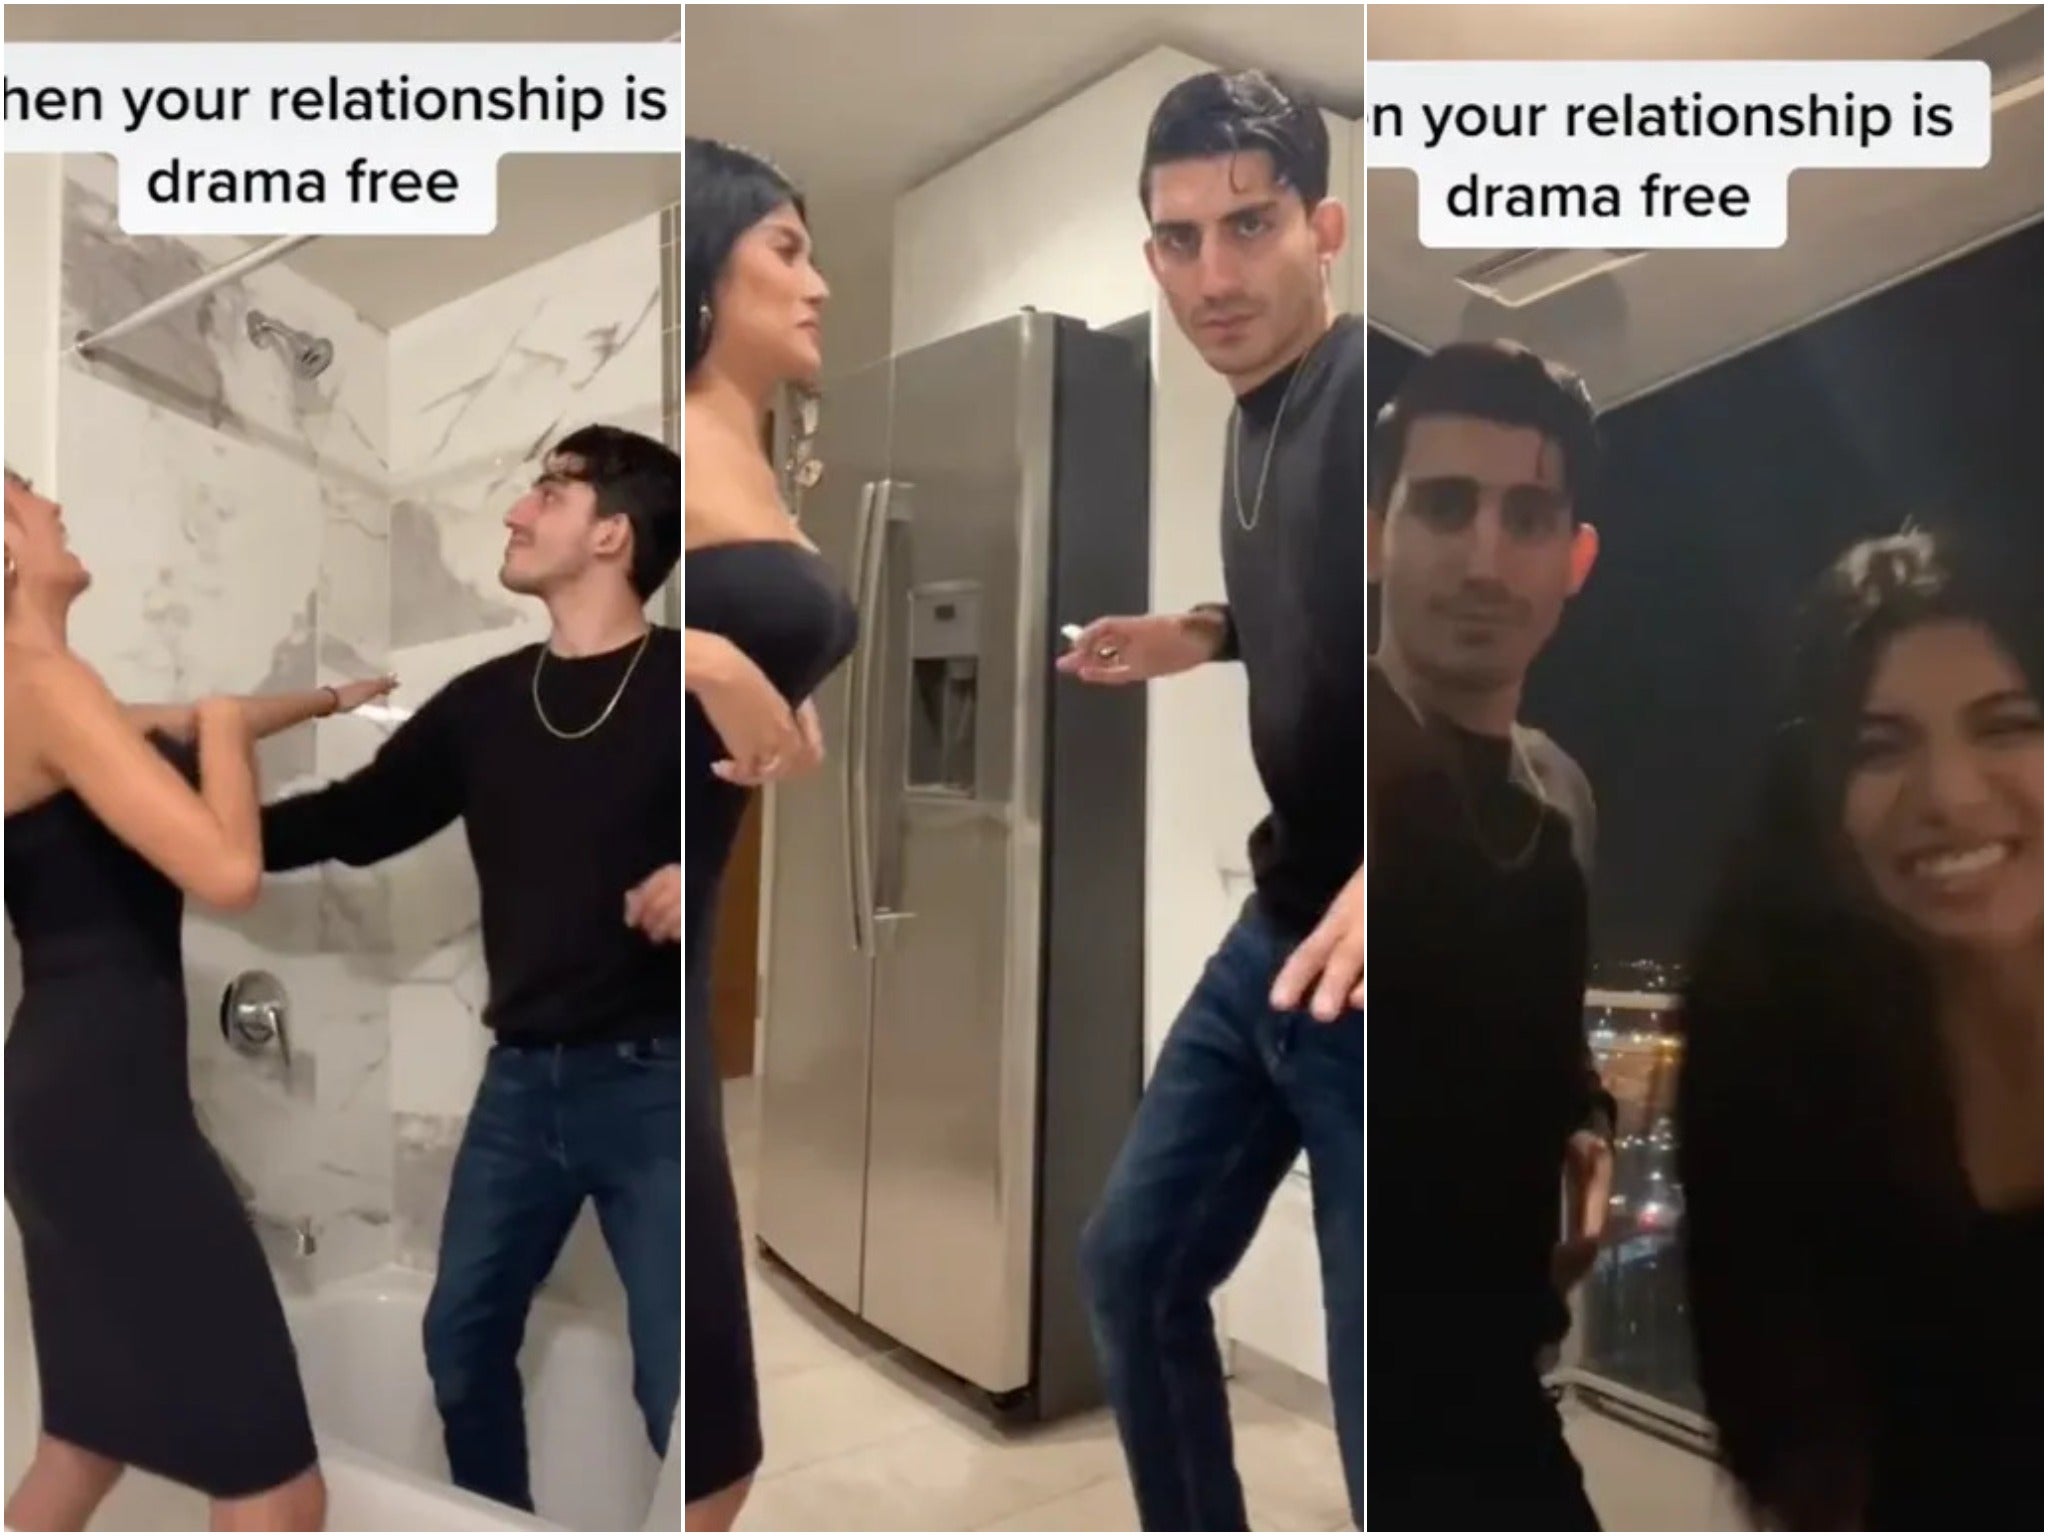 A TikTok video of a couple celebrating their drama-free relationship has emerged after he was arrested for her murder